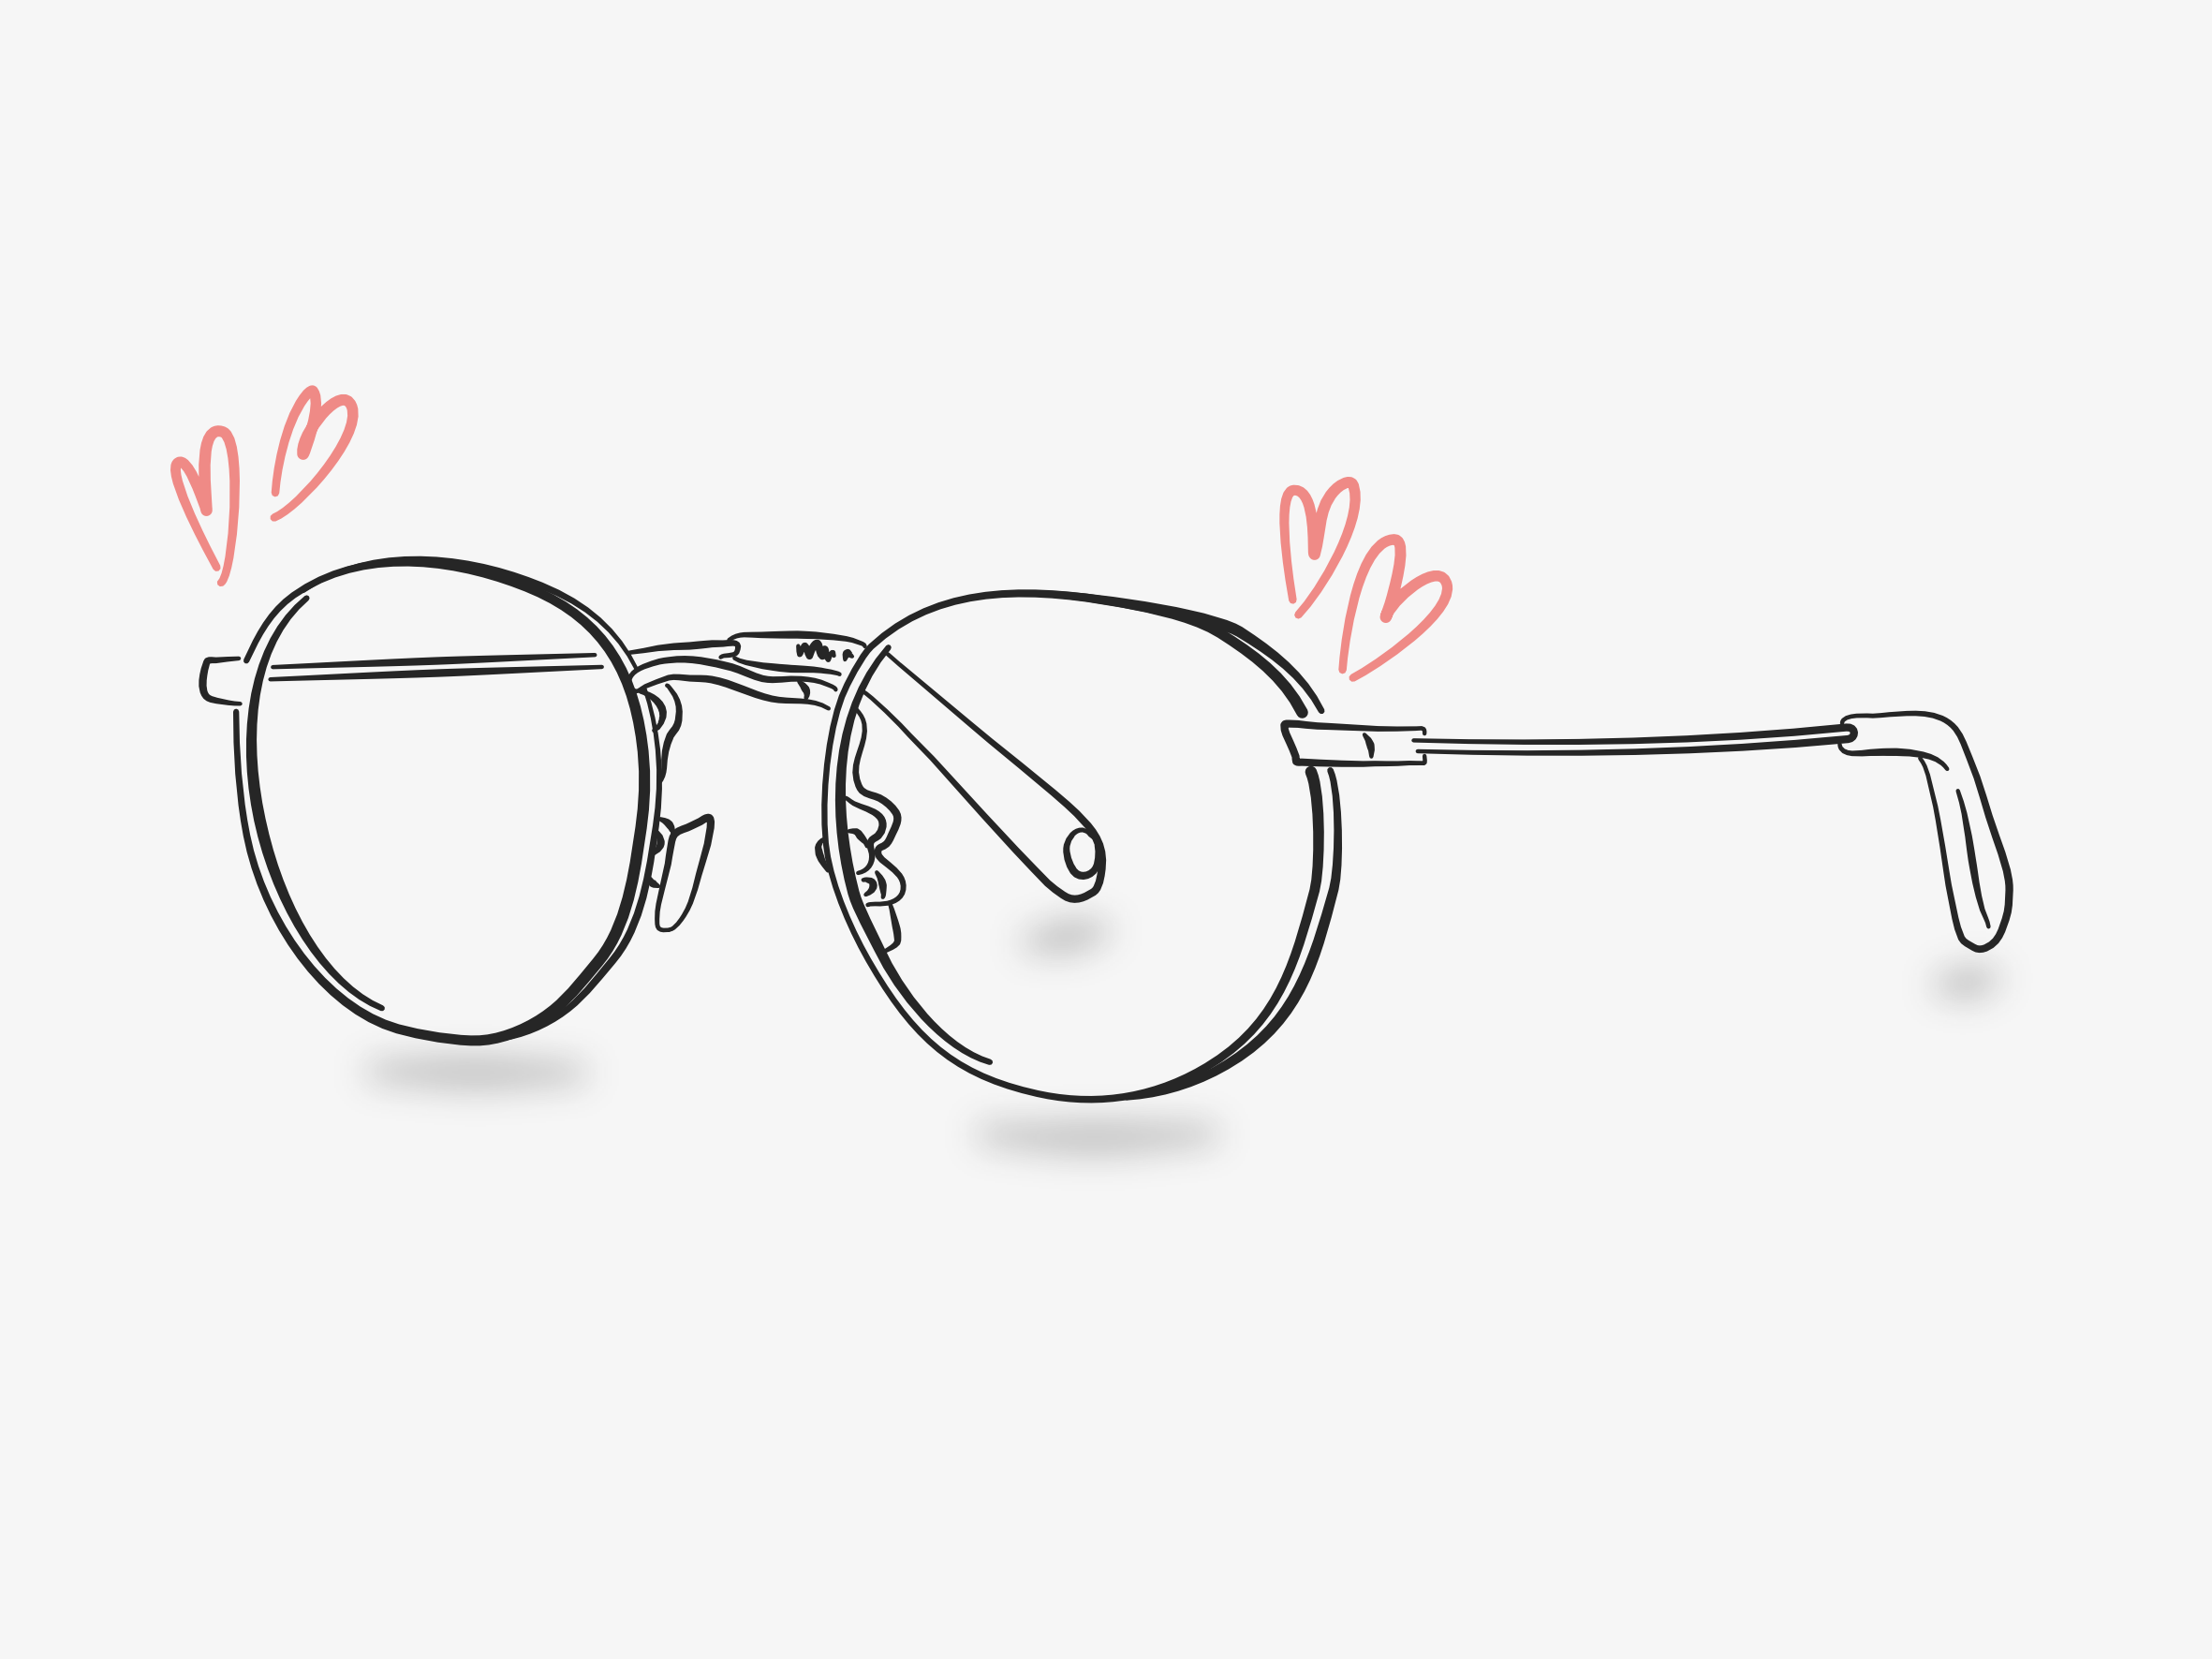 Design Story: My Glasses with Cubitts